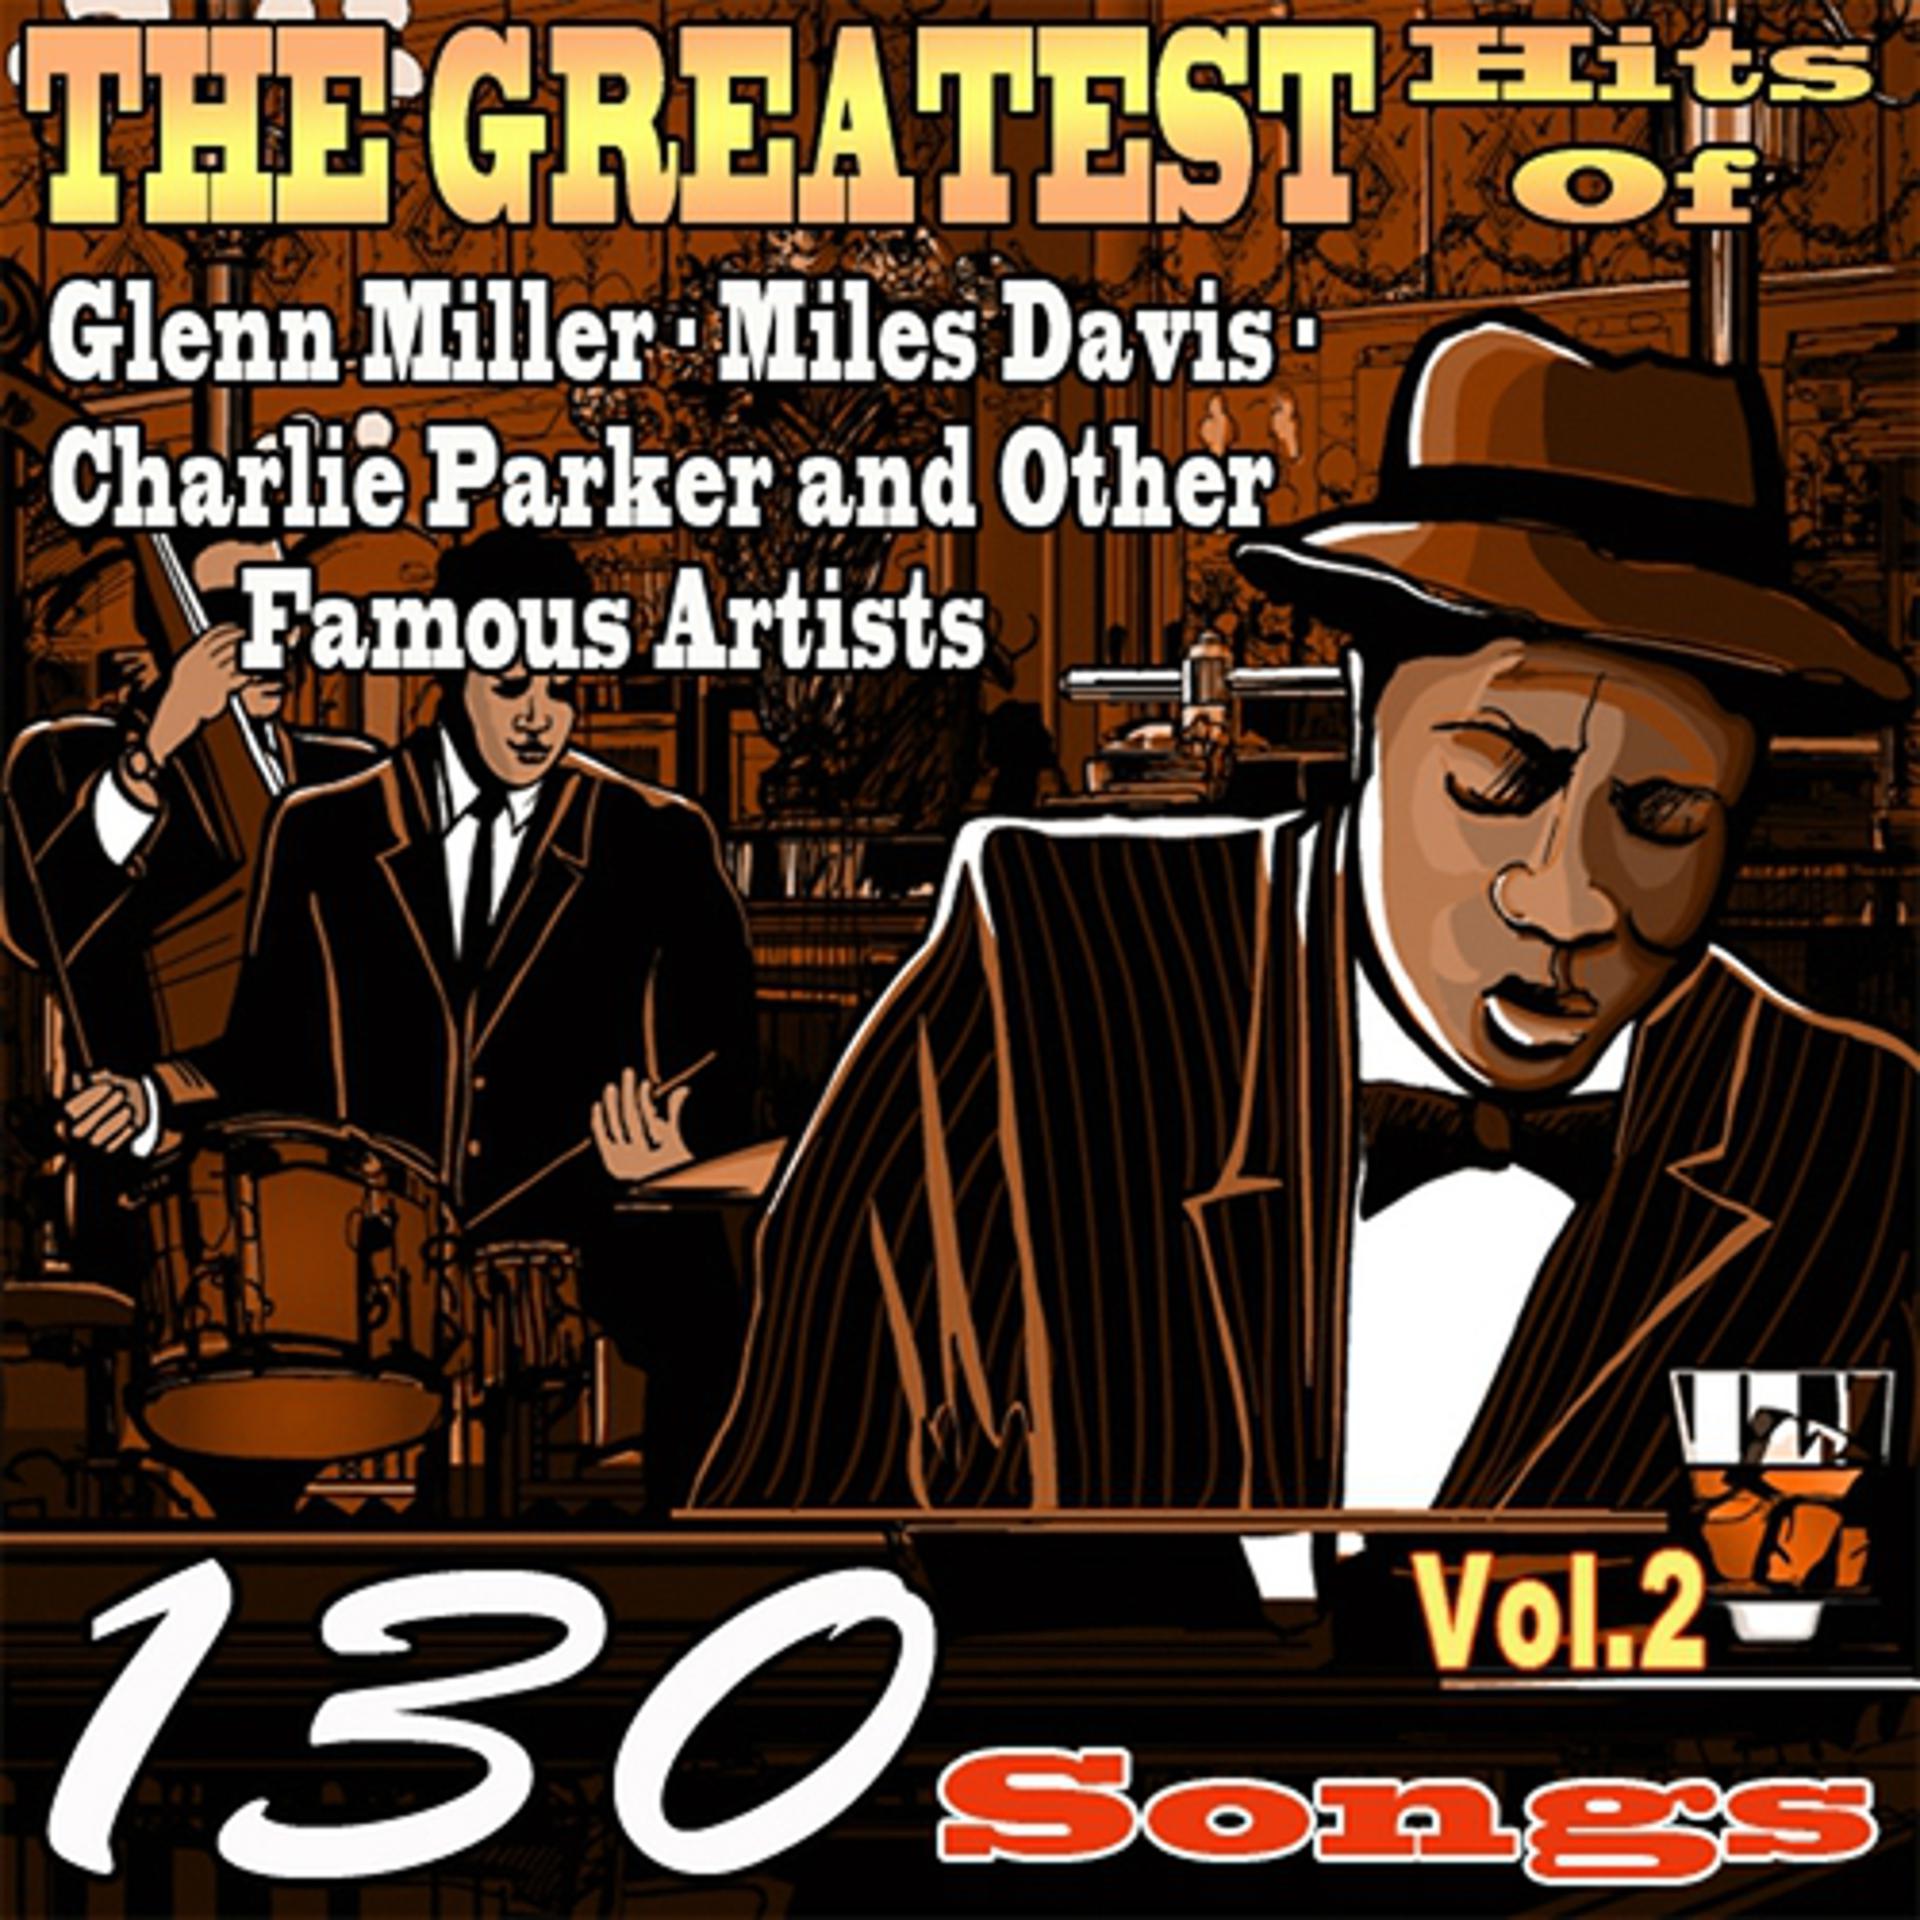 Постер альбома The Greatest Hits of Glenn Miller,Miles Davis,Charlie Parker and Other Famous Artists, Vol. 2